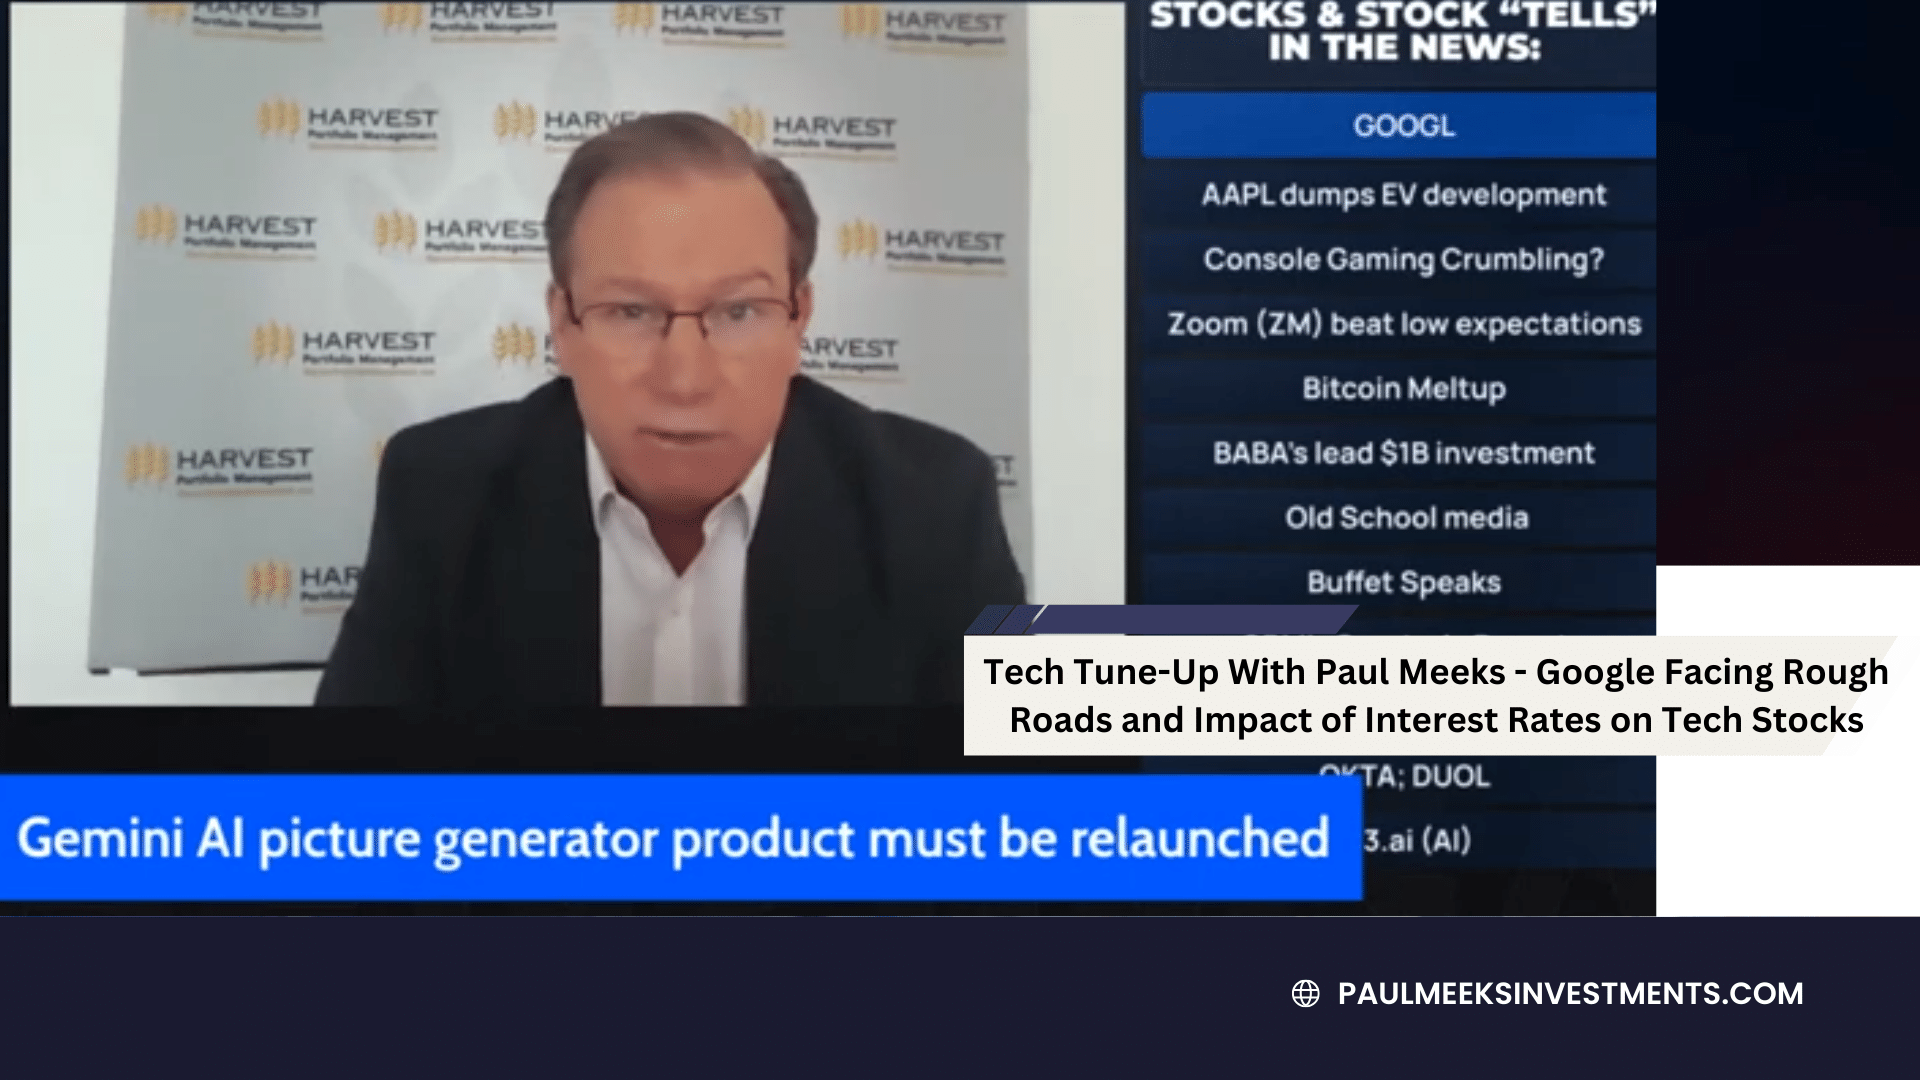 Google Facing Rough Roads and Impact of Interest Rates on Tech Stocks – Tech Tune-Up with Paul Meeks